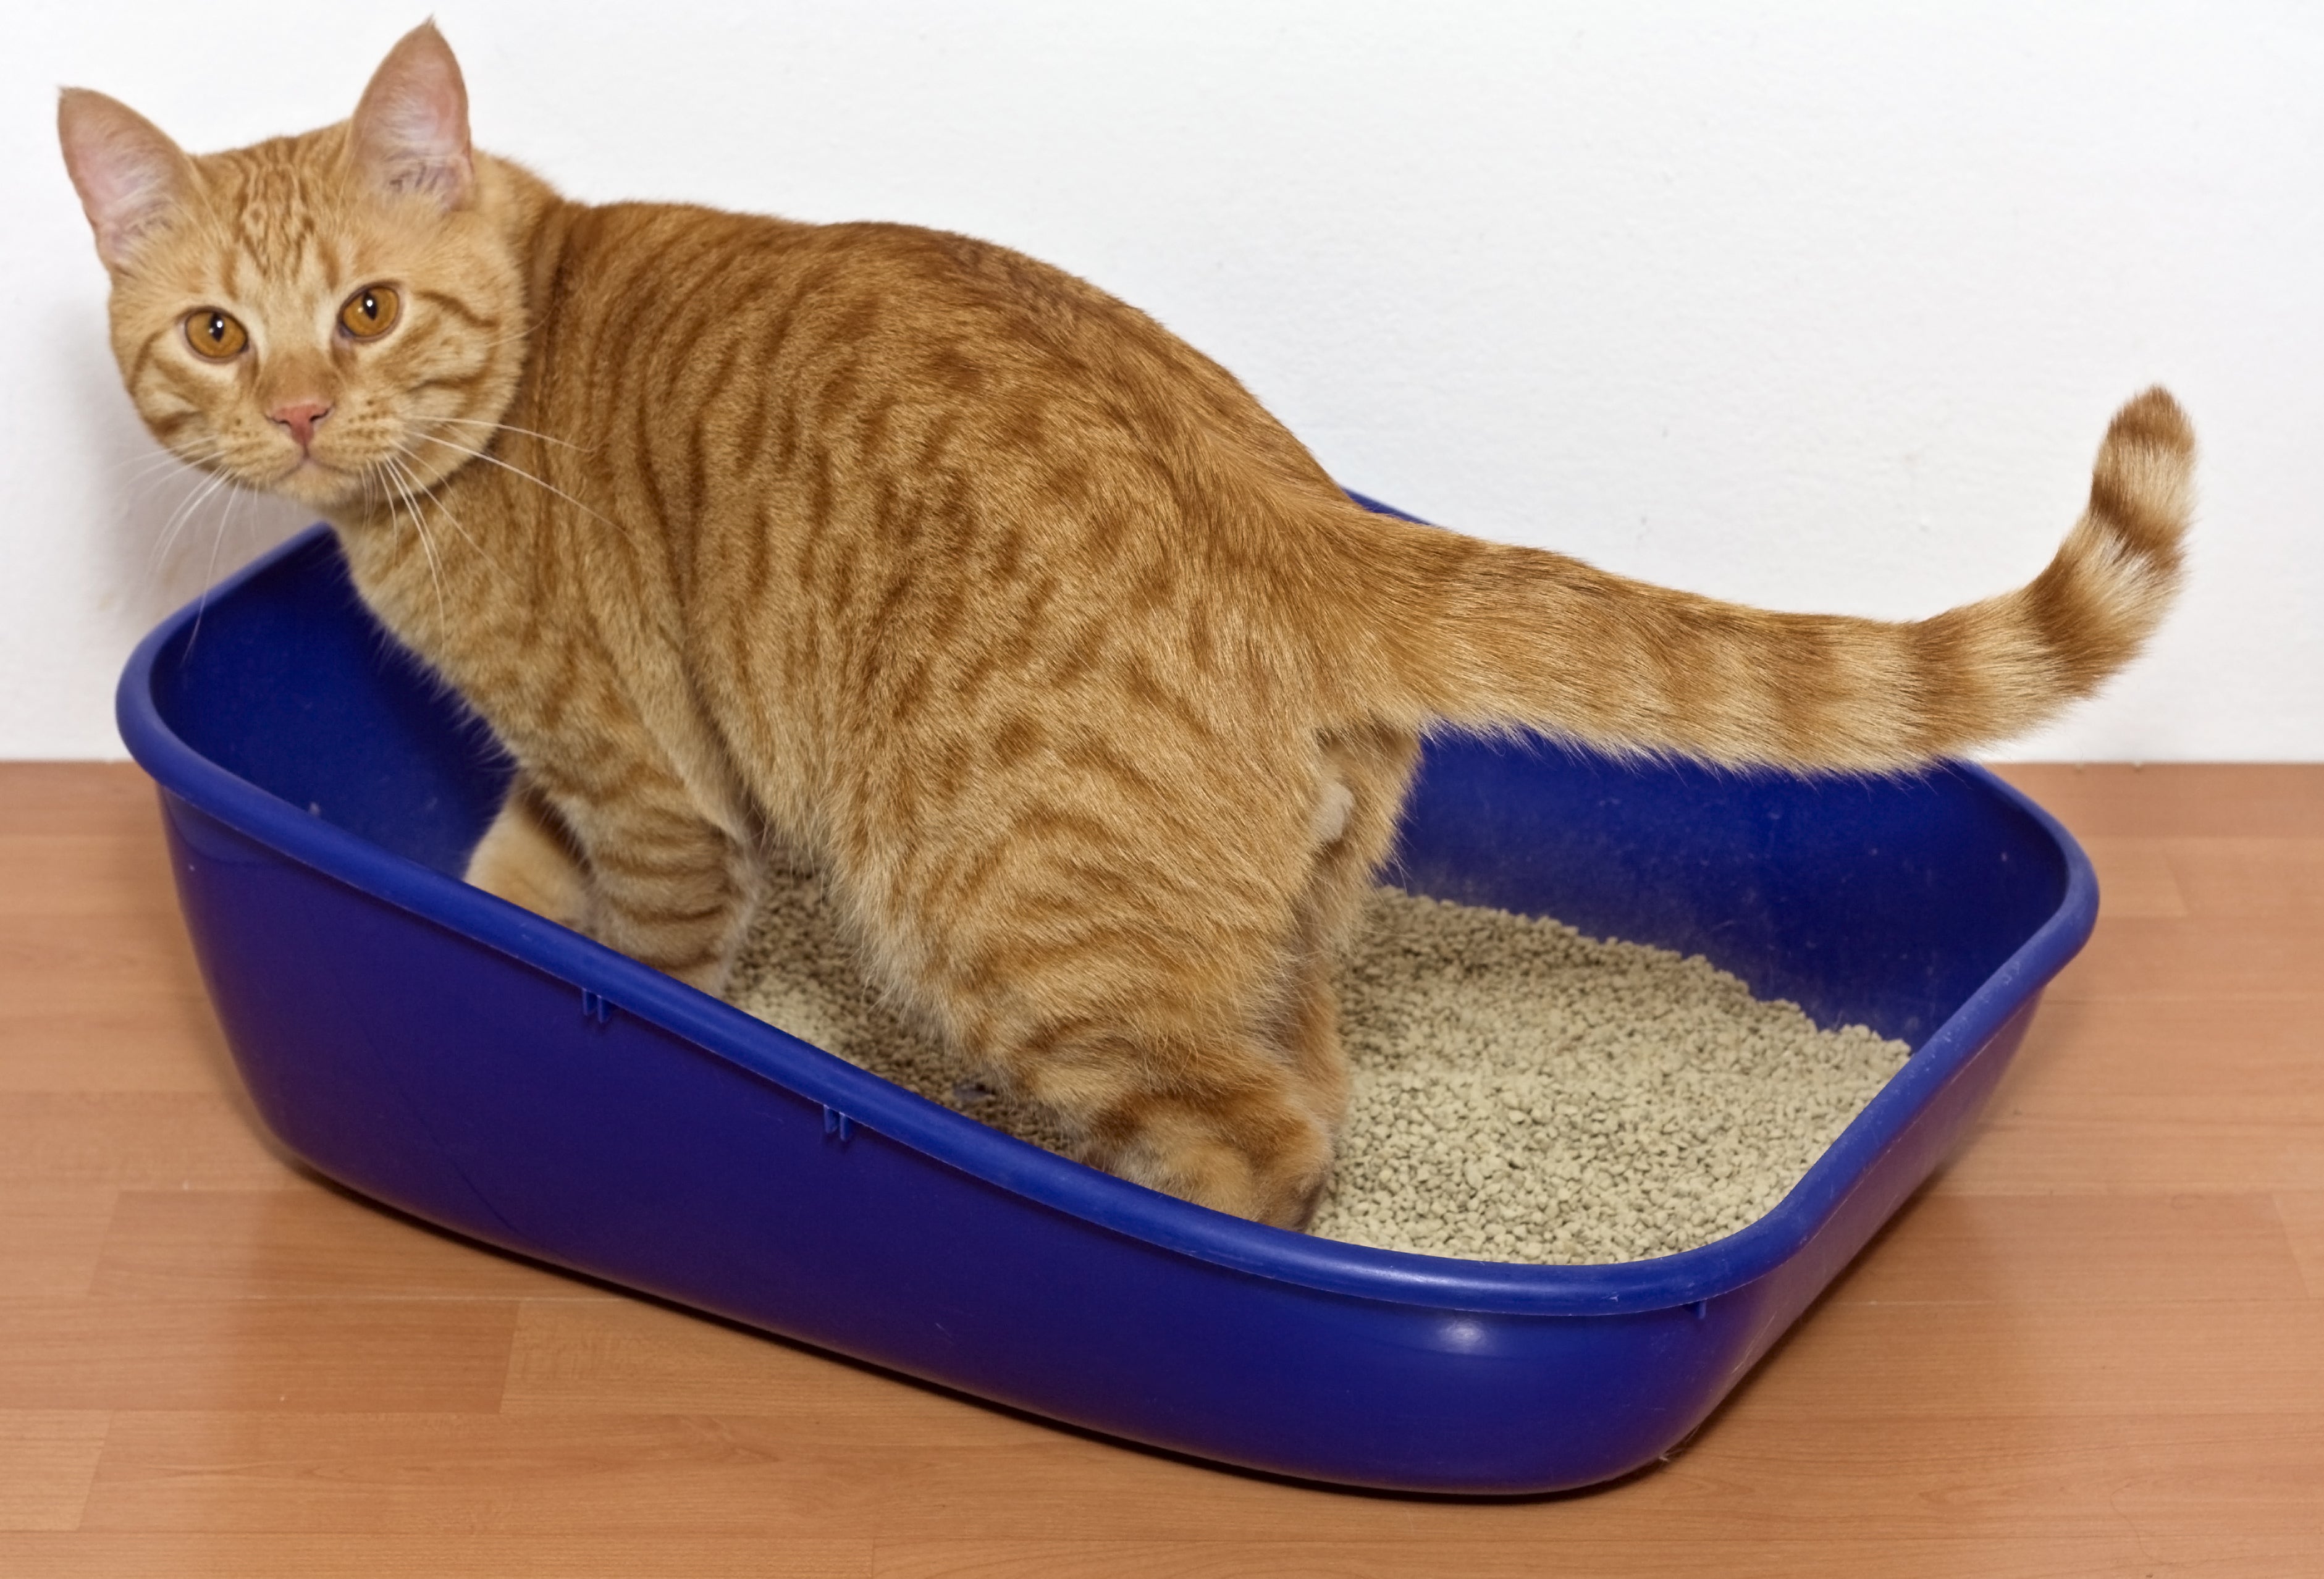 Litter Boxes In Schools Hoax: Most Up-to-Date Encyclopedia, News